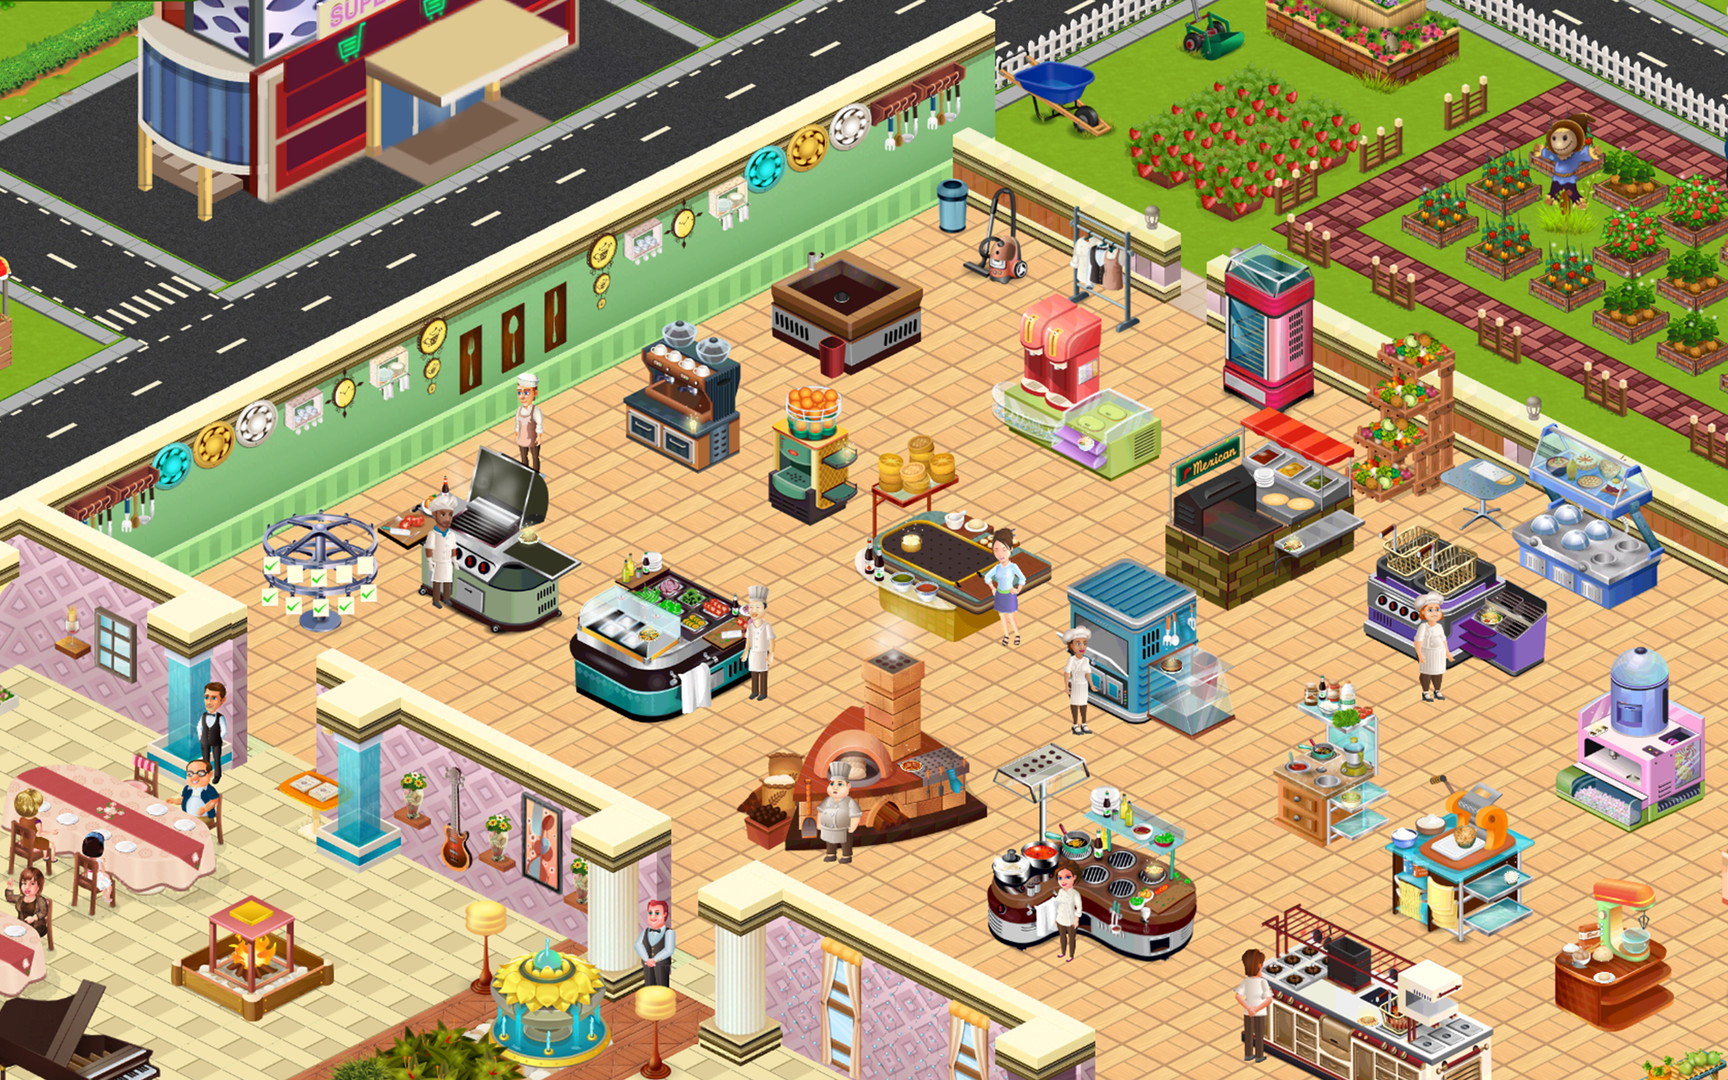 Star Chef™ : Cooking Game for ipod download